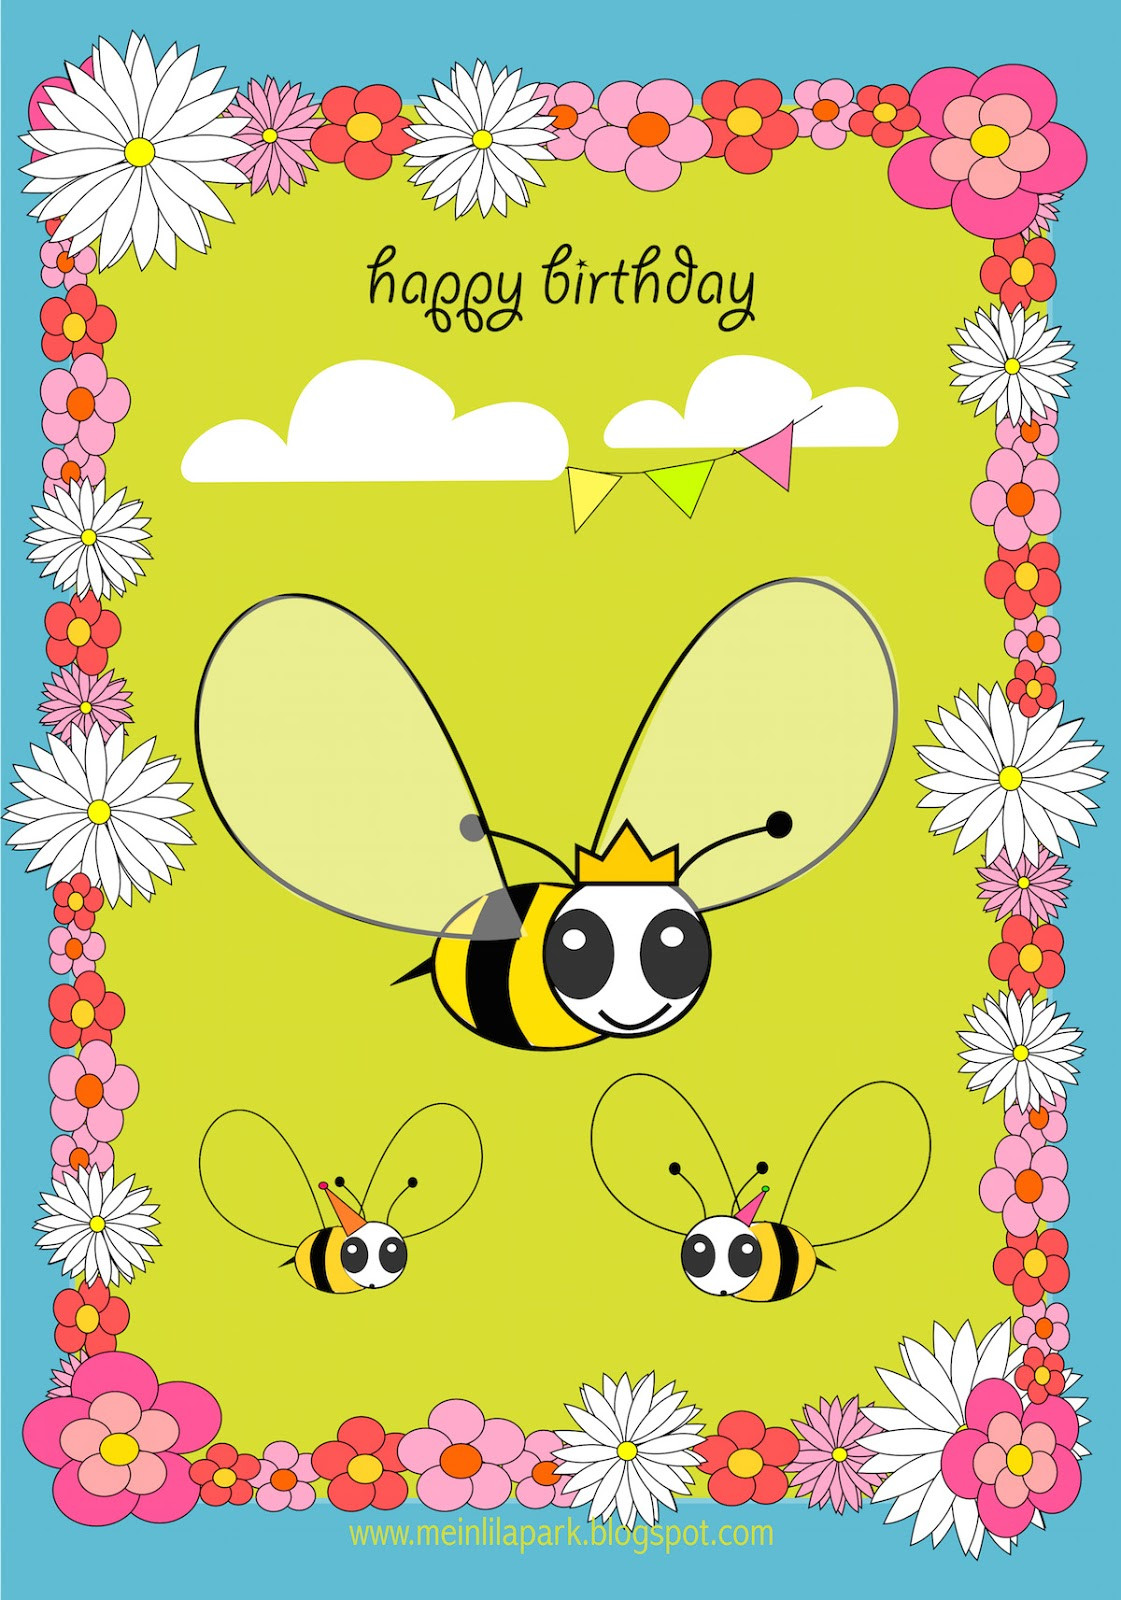 Printable Birthday Cards For Kids
 Free printable Happy Birthday card for kids ausdruckbare